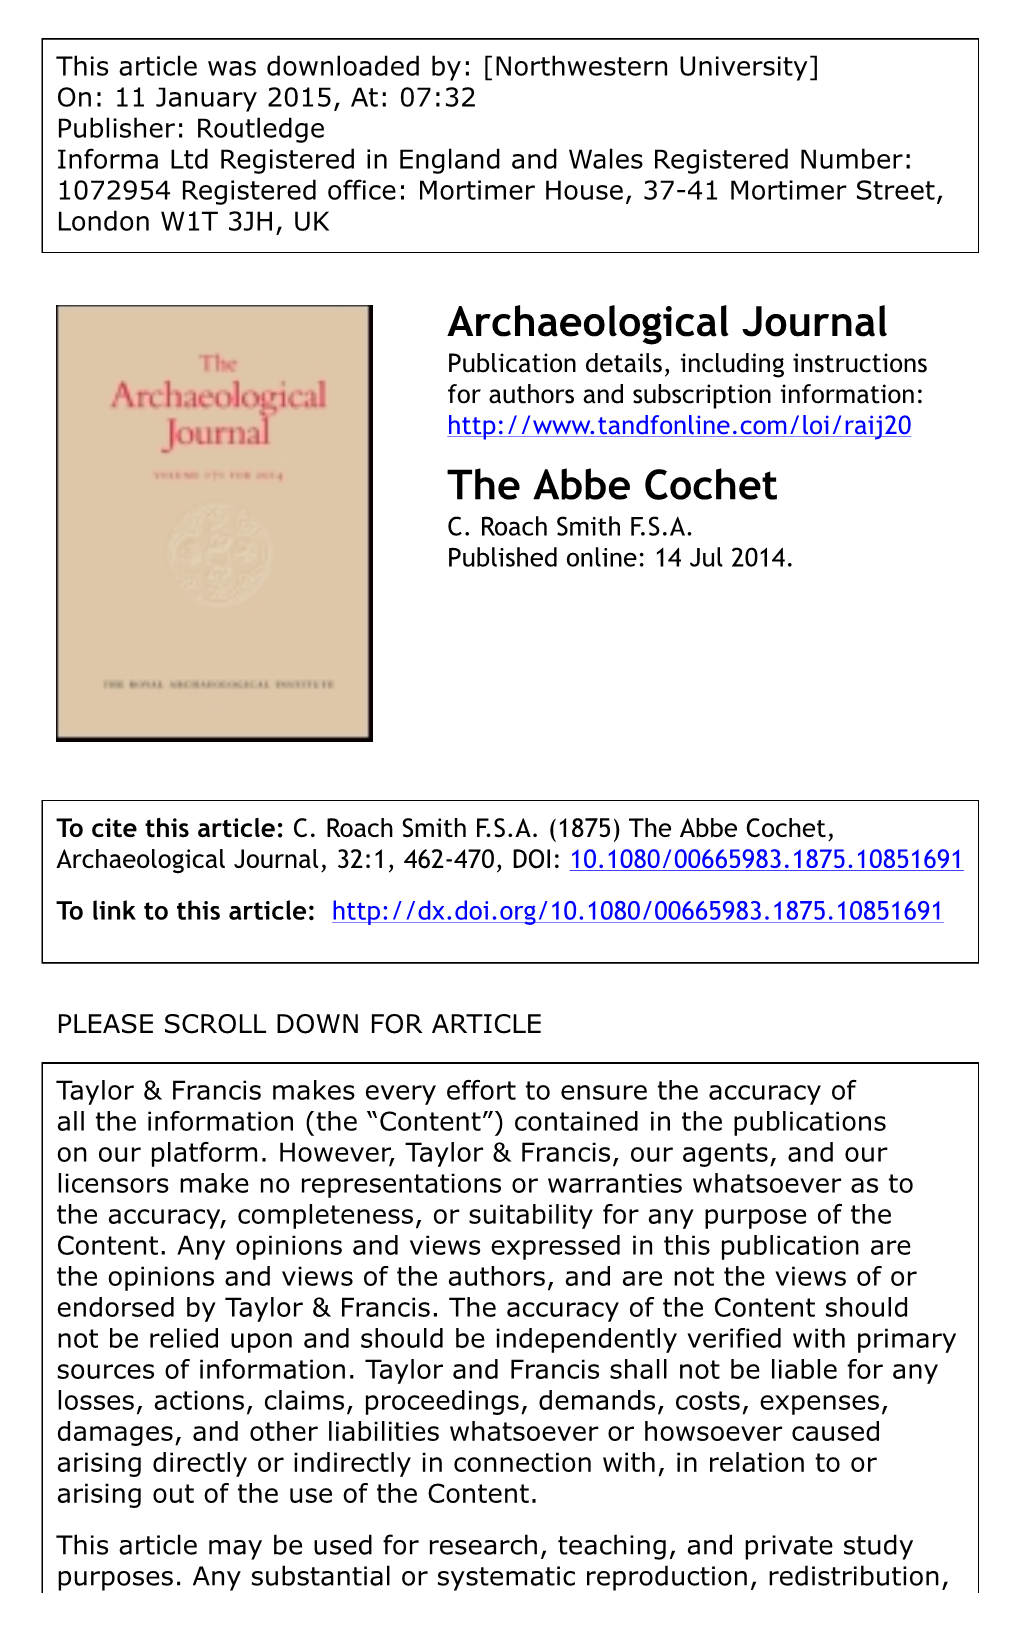 Archaeological Journal the Abbe Cochet